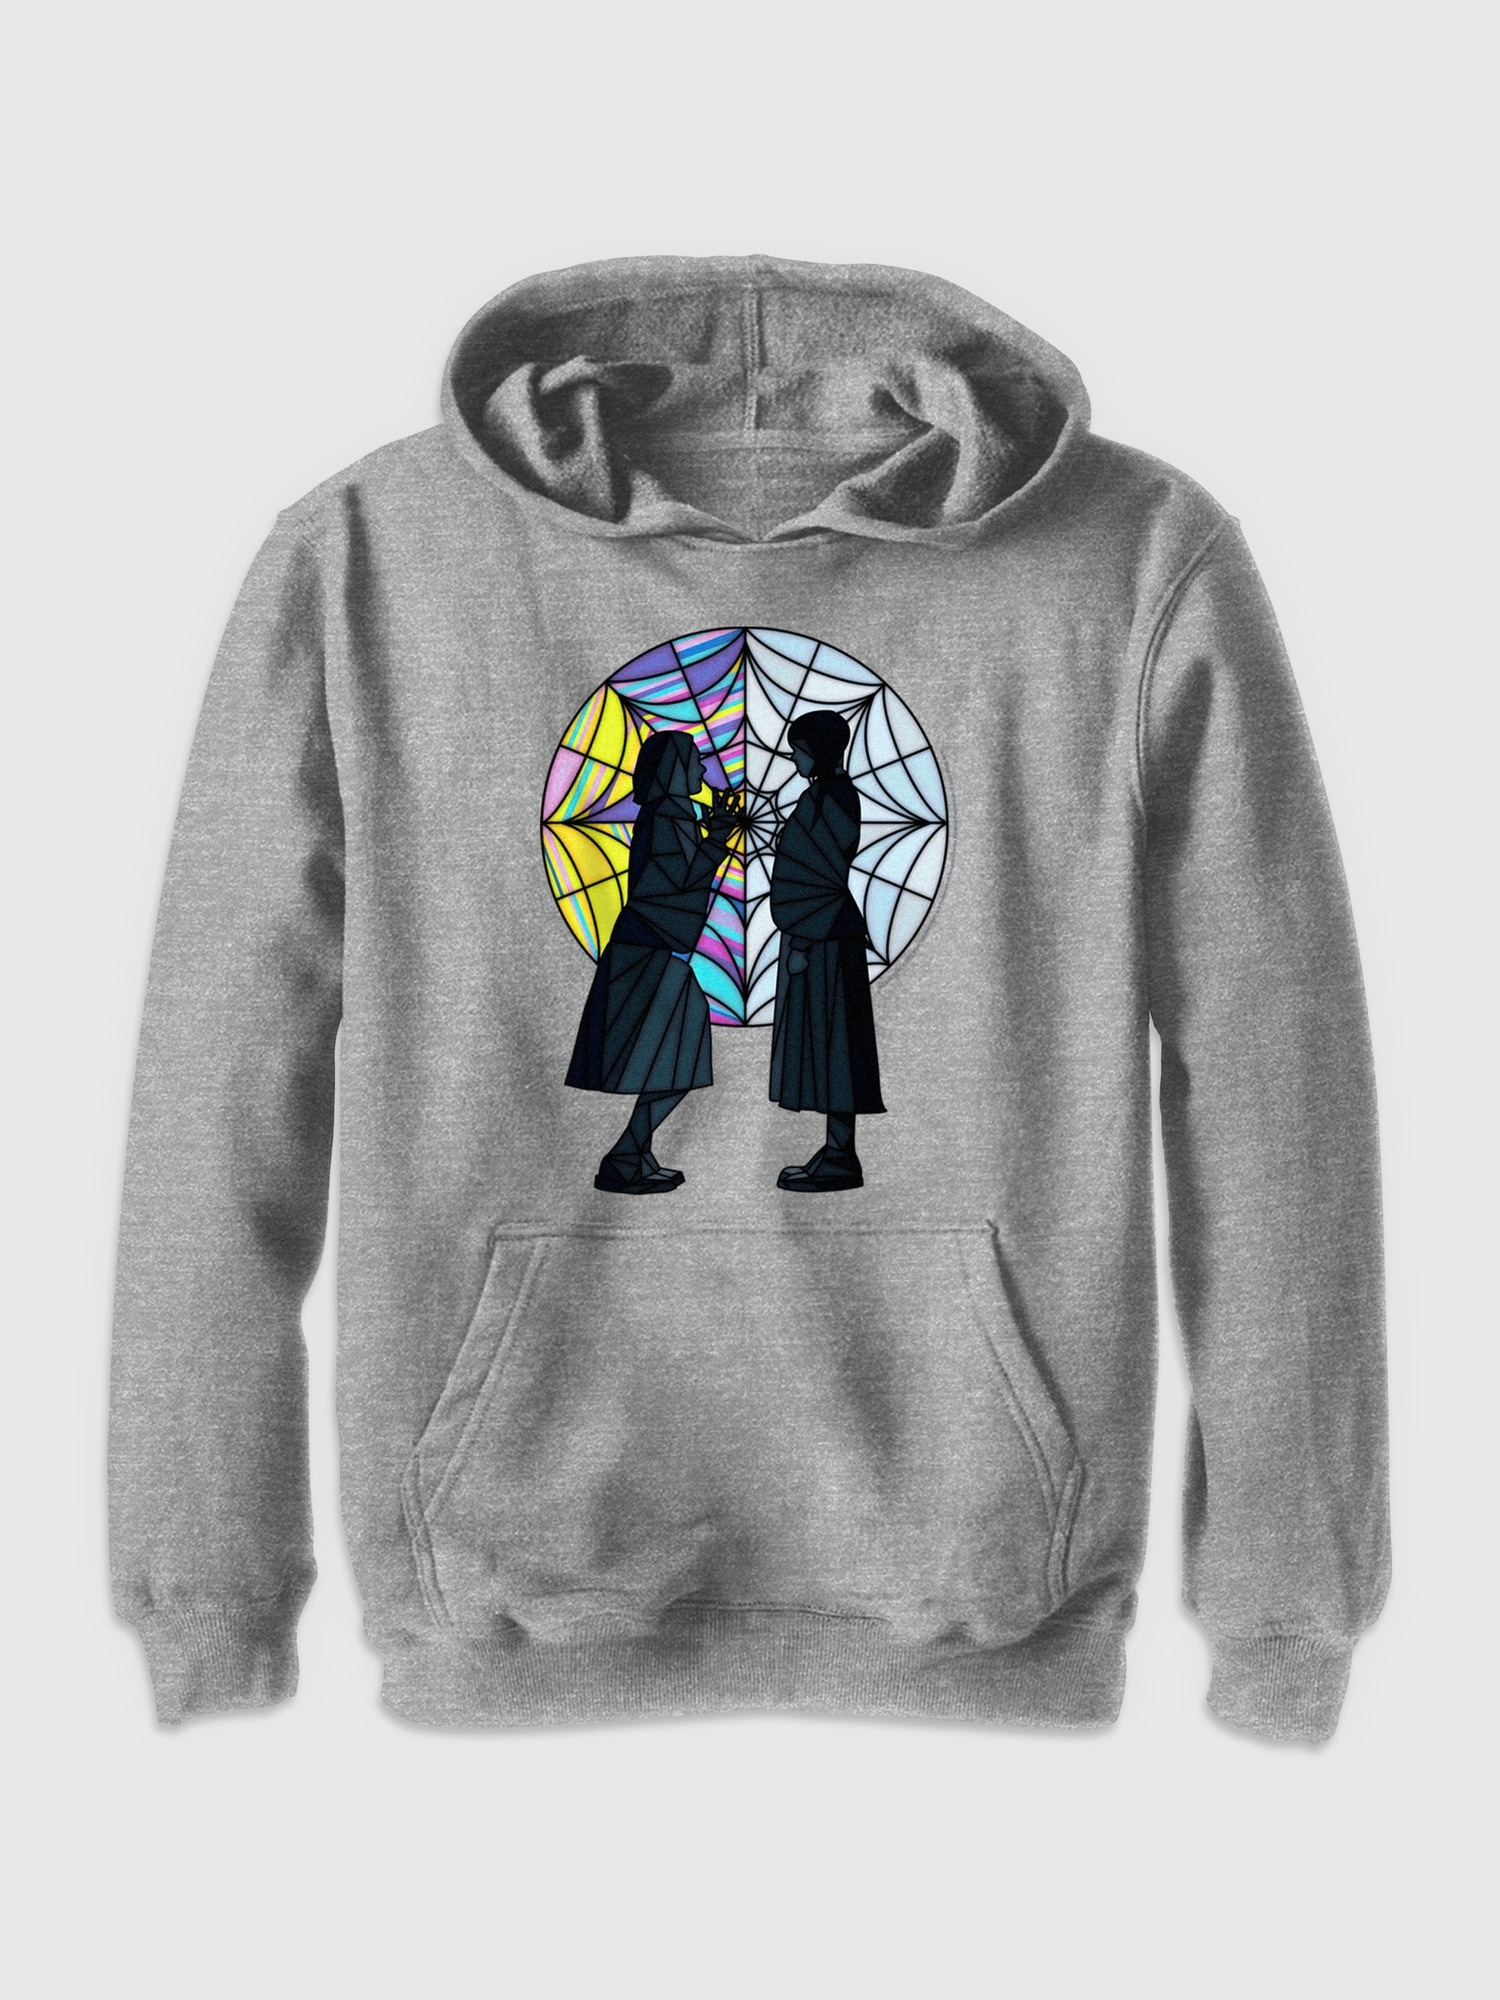 Kids Wednesday Stained Glass Graphic Hooded Sweatshirt